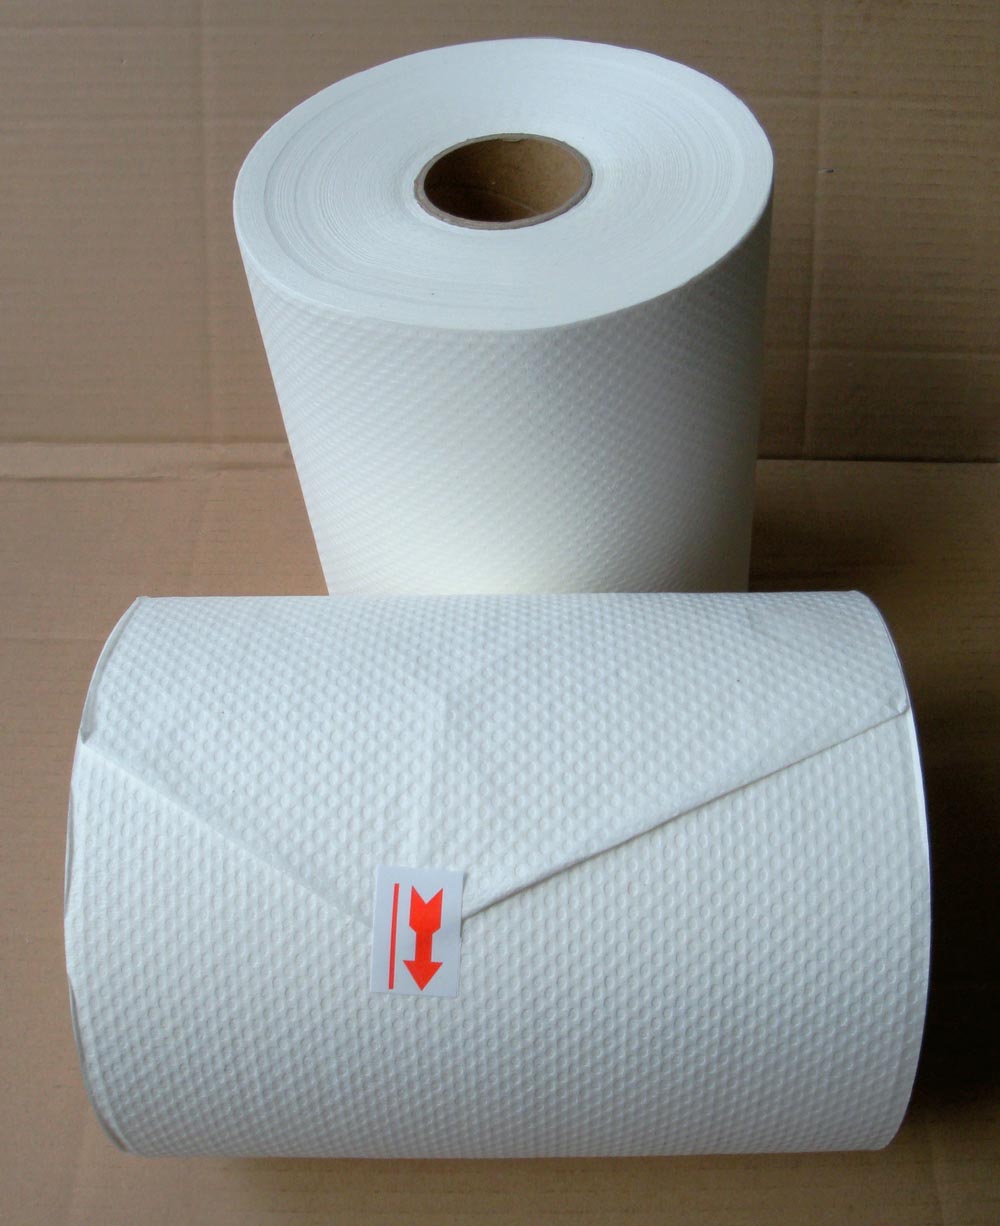 Large hand towel rolls used in station toilets